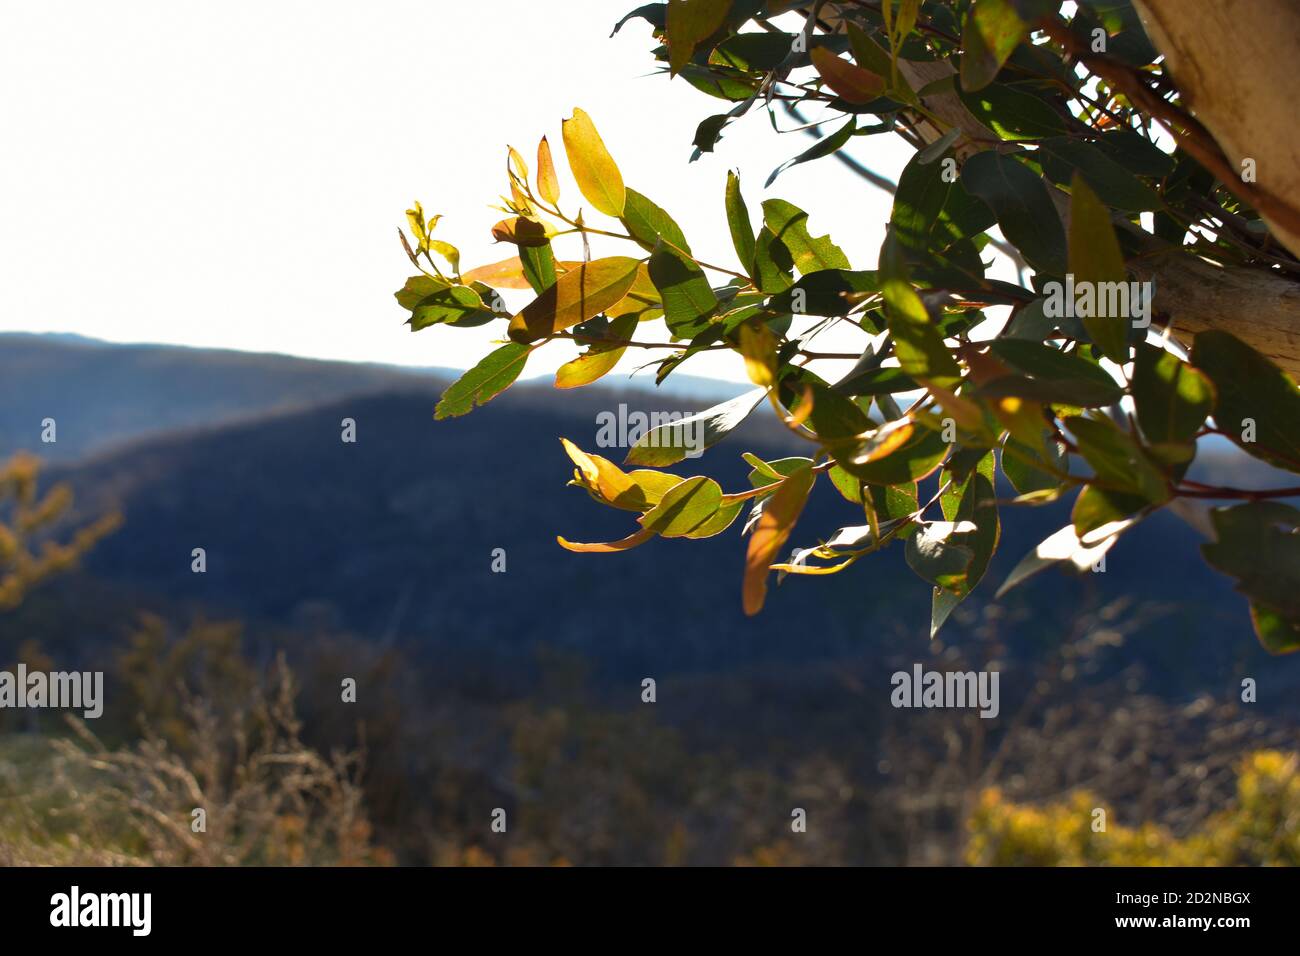 leaves from a tree with the background of blue mountains Stock Photo